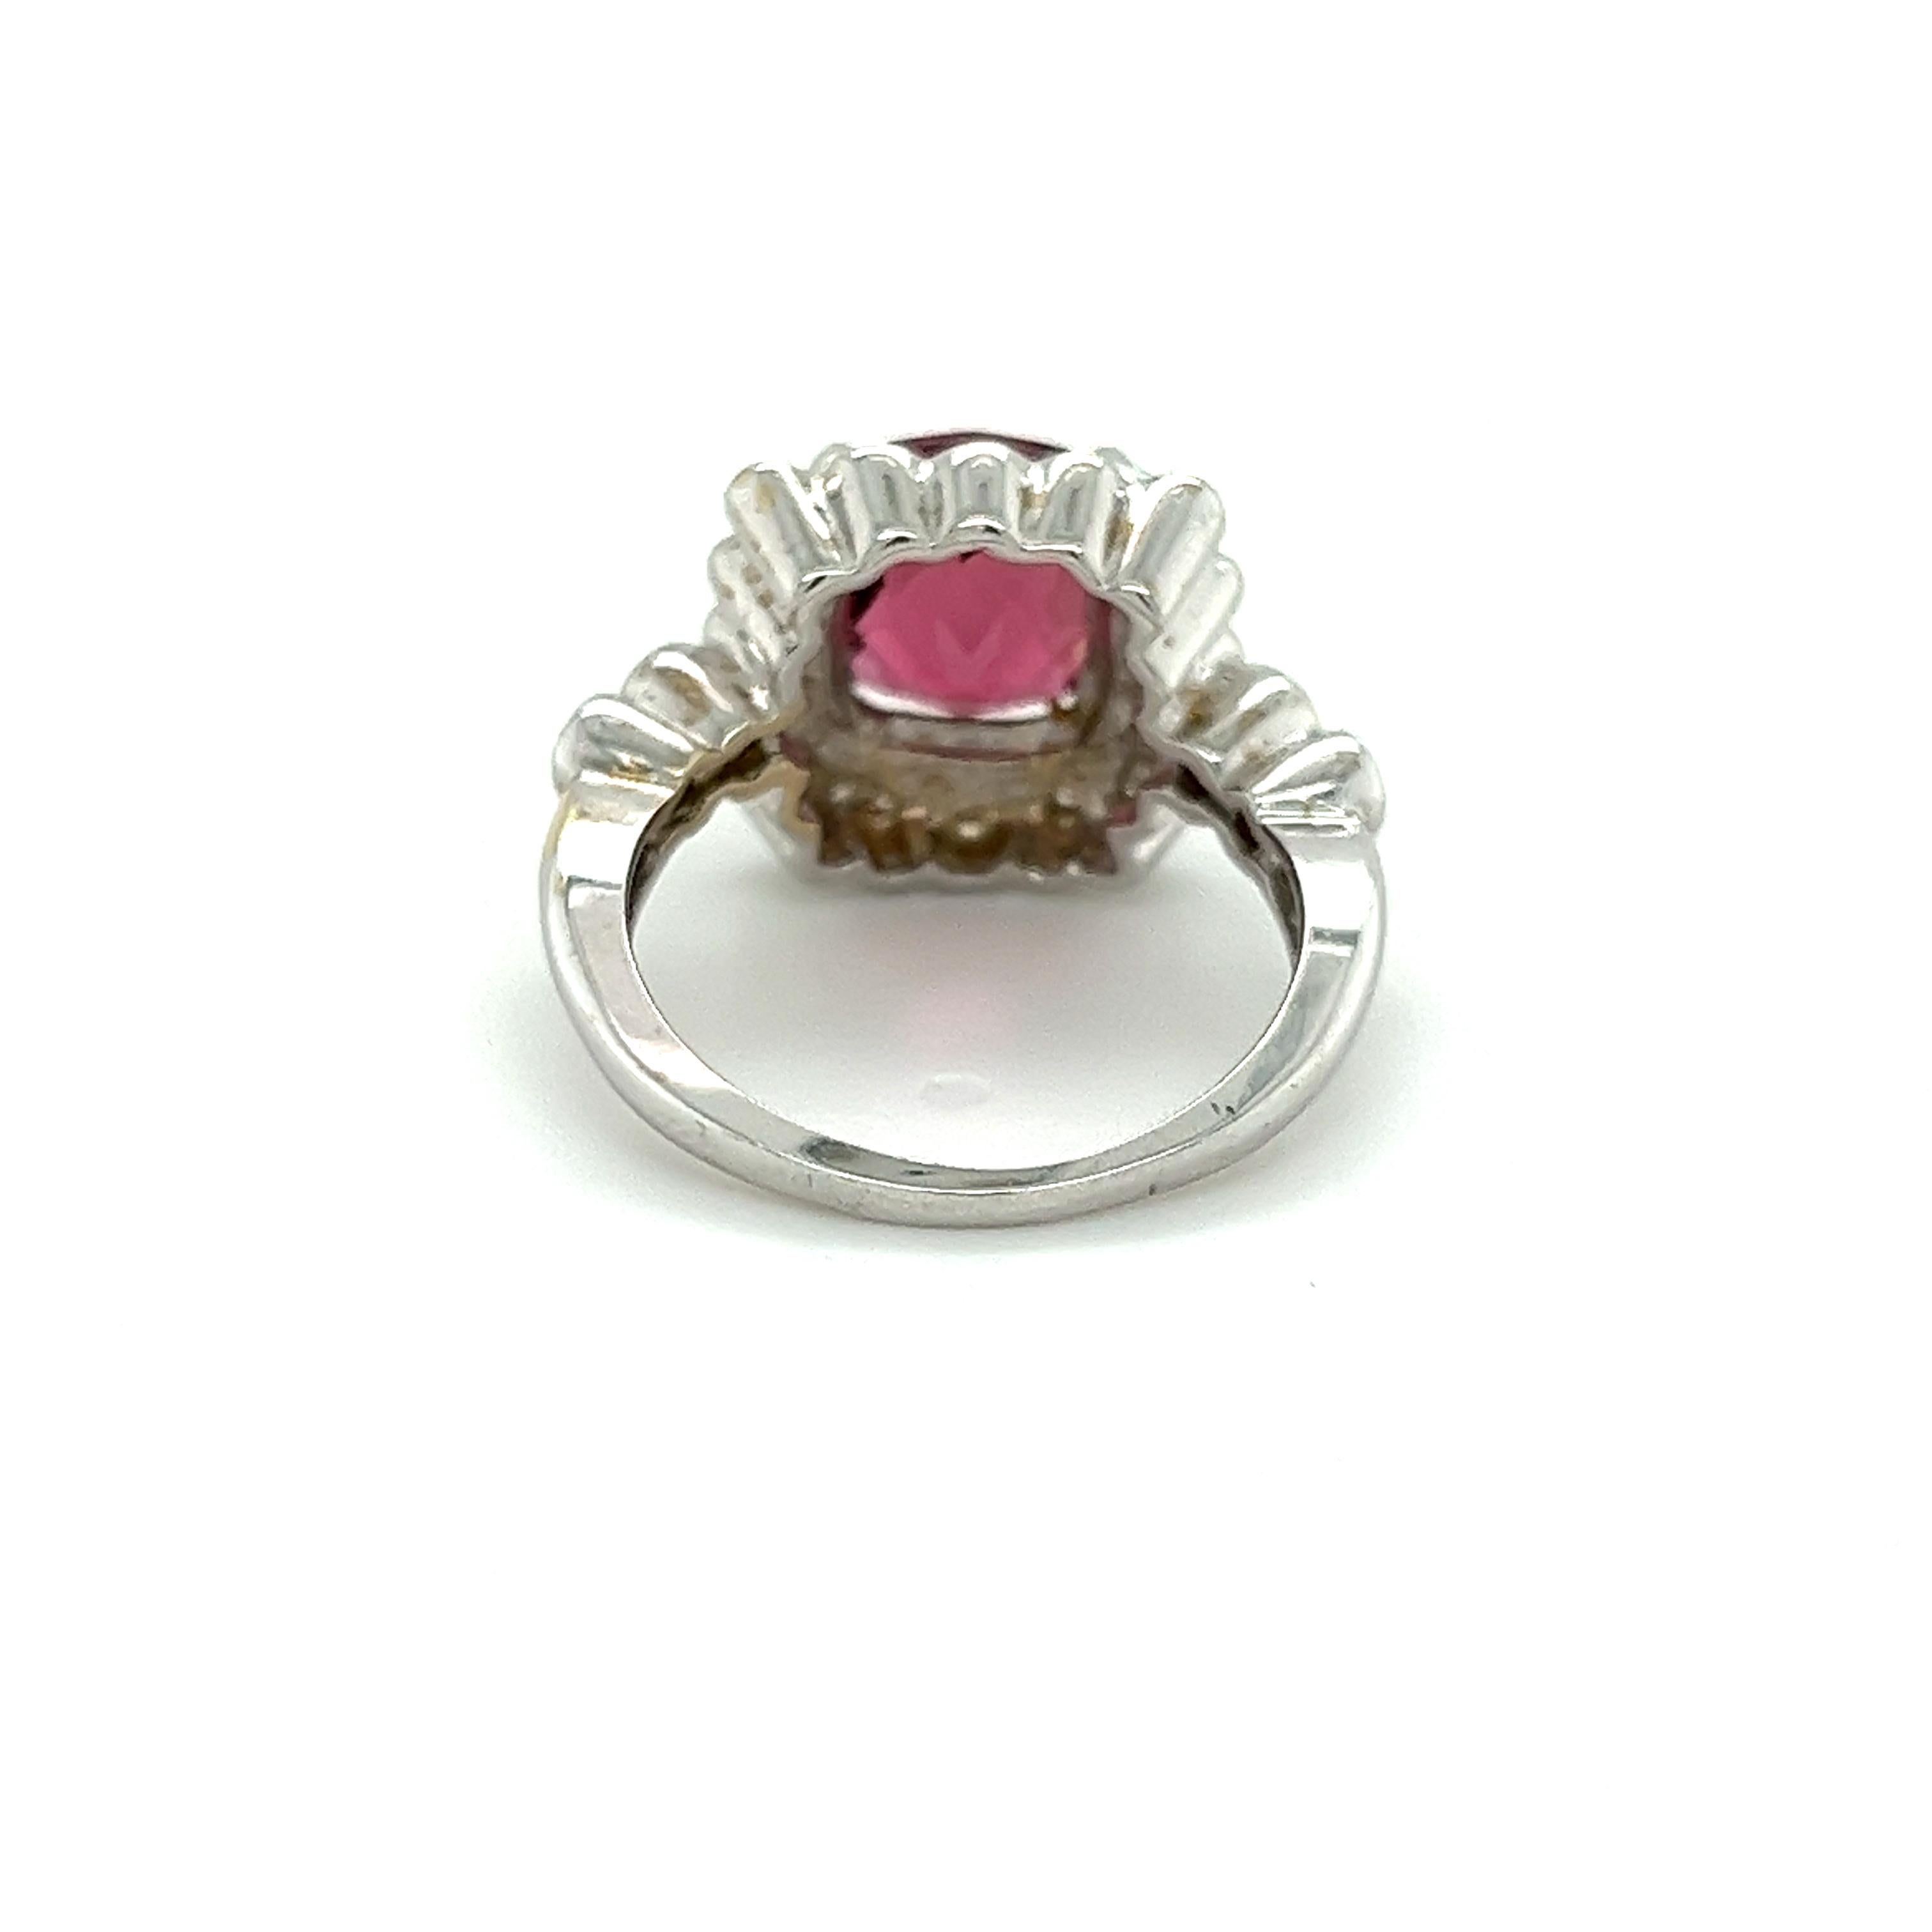 A tourmaline and diamond ring, set in 18k white gold. Centering a checherkbaord cut pinkish purple tourmaline. 4-Prong set and adorned with a round cut white diamond halo and diamond set shank. The tourmaline has a rich, dense mix of pink/purple